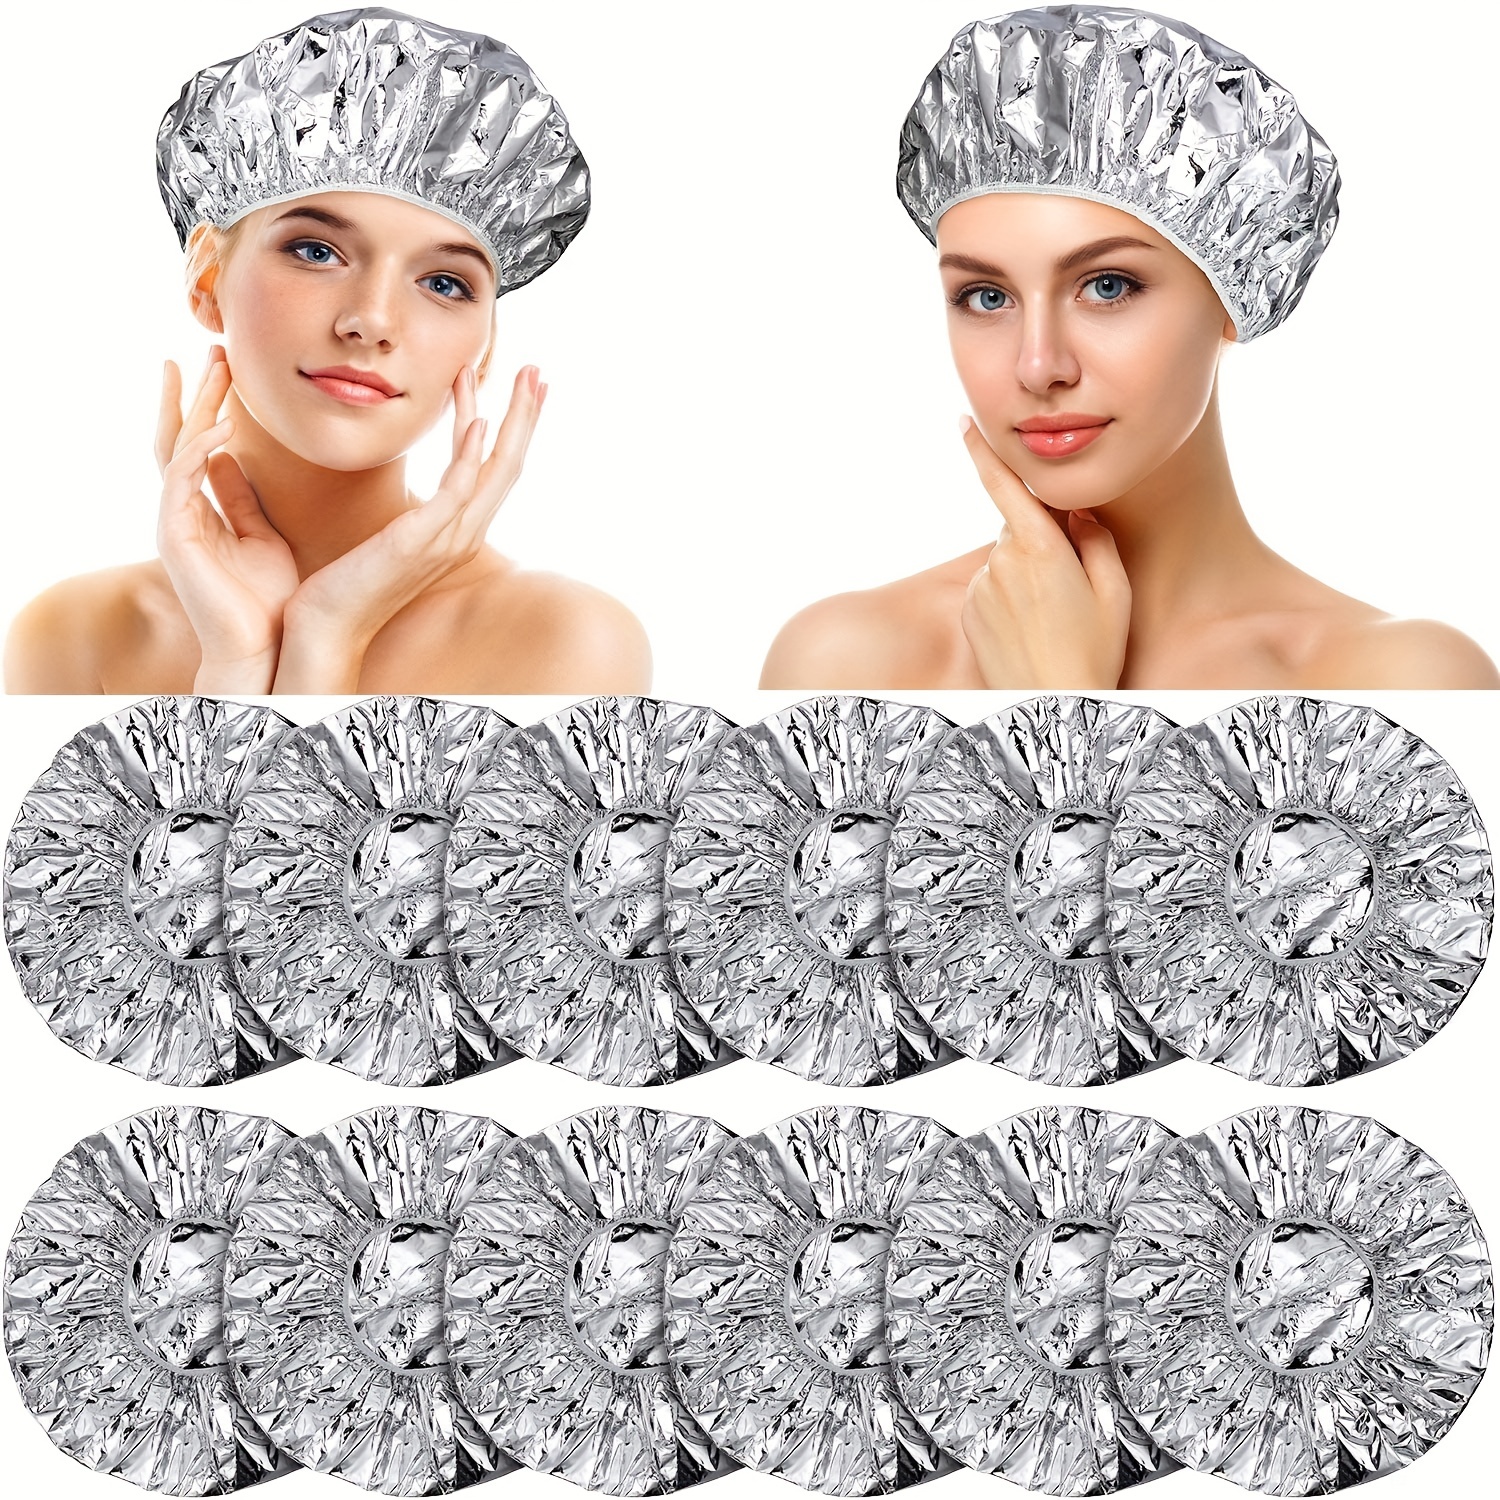 

12 Pieces Deep Conditioning Caps Aluminum Foil Reusable Hair Processing Caps Hair Coloring Shower Caps For Home Salon Use (silvery, 30.48cm) - Bathroom Accessories